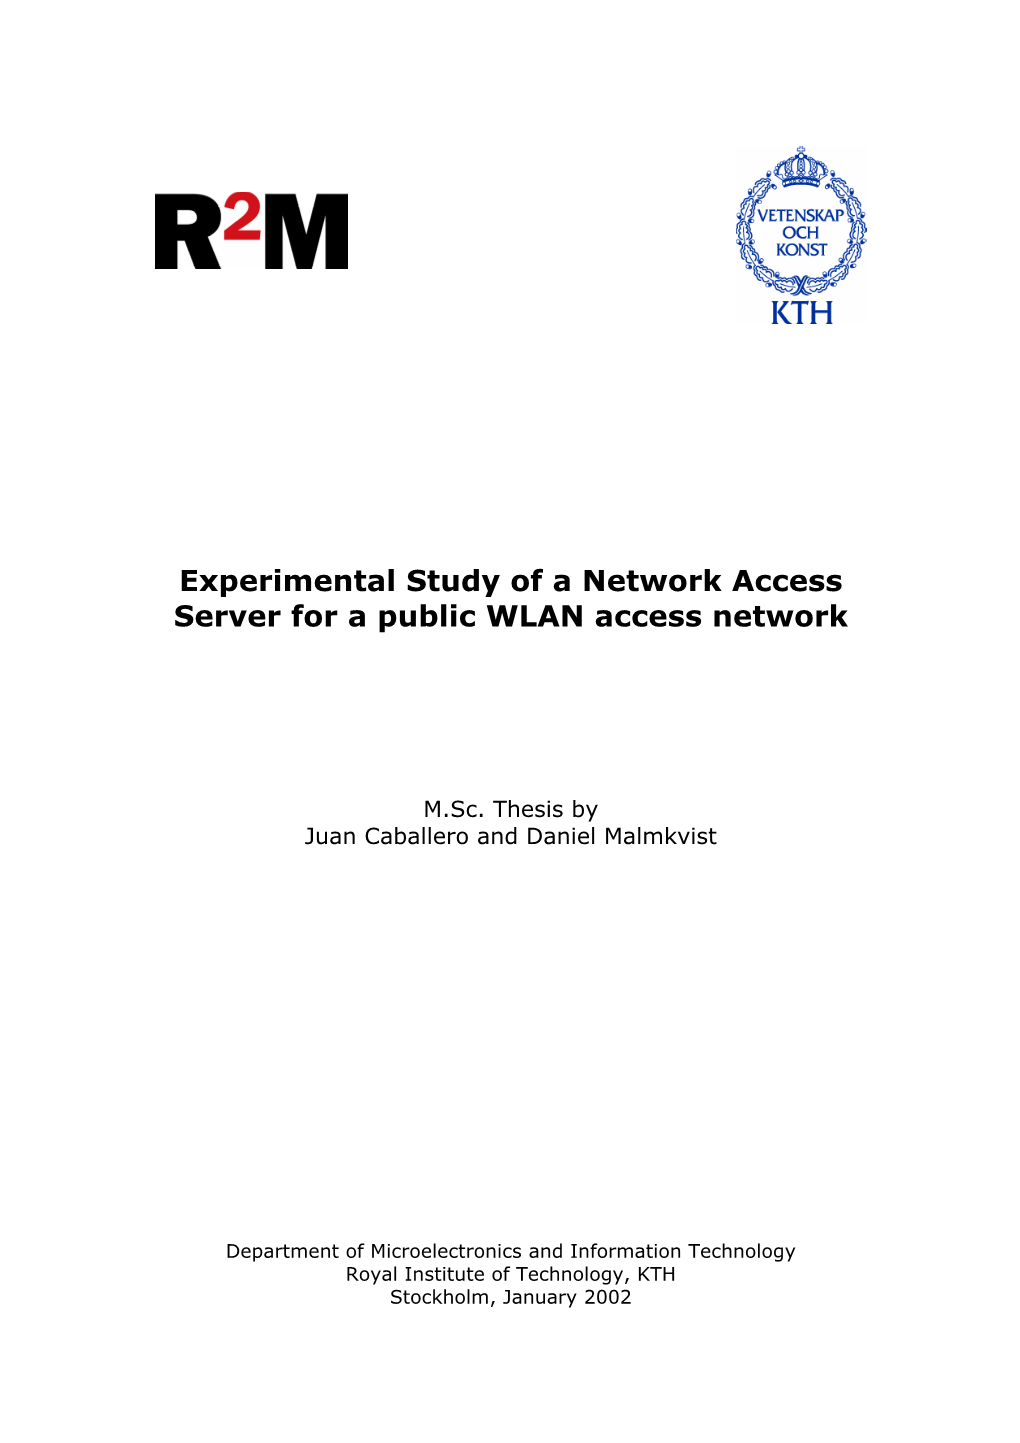 Experimental Study of a Network Access Server for a Public WLAN Access Network